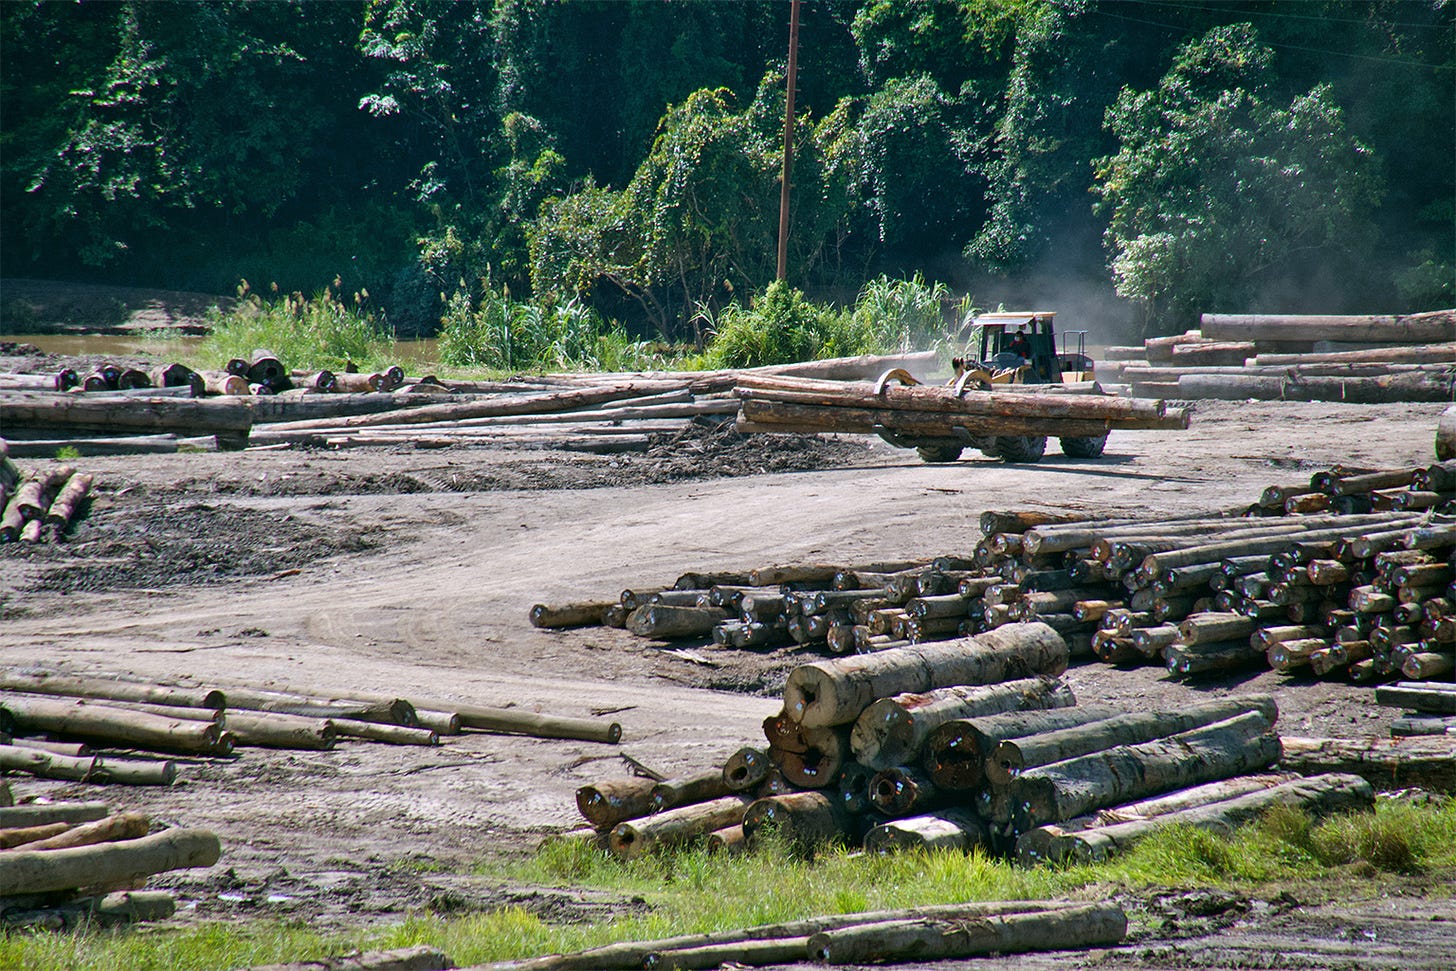 Logs harvested from the forests of Malaysian Borneo.